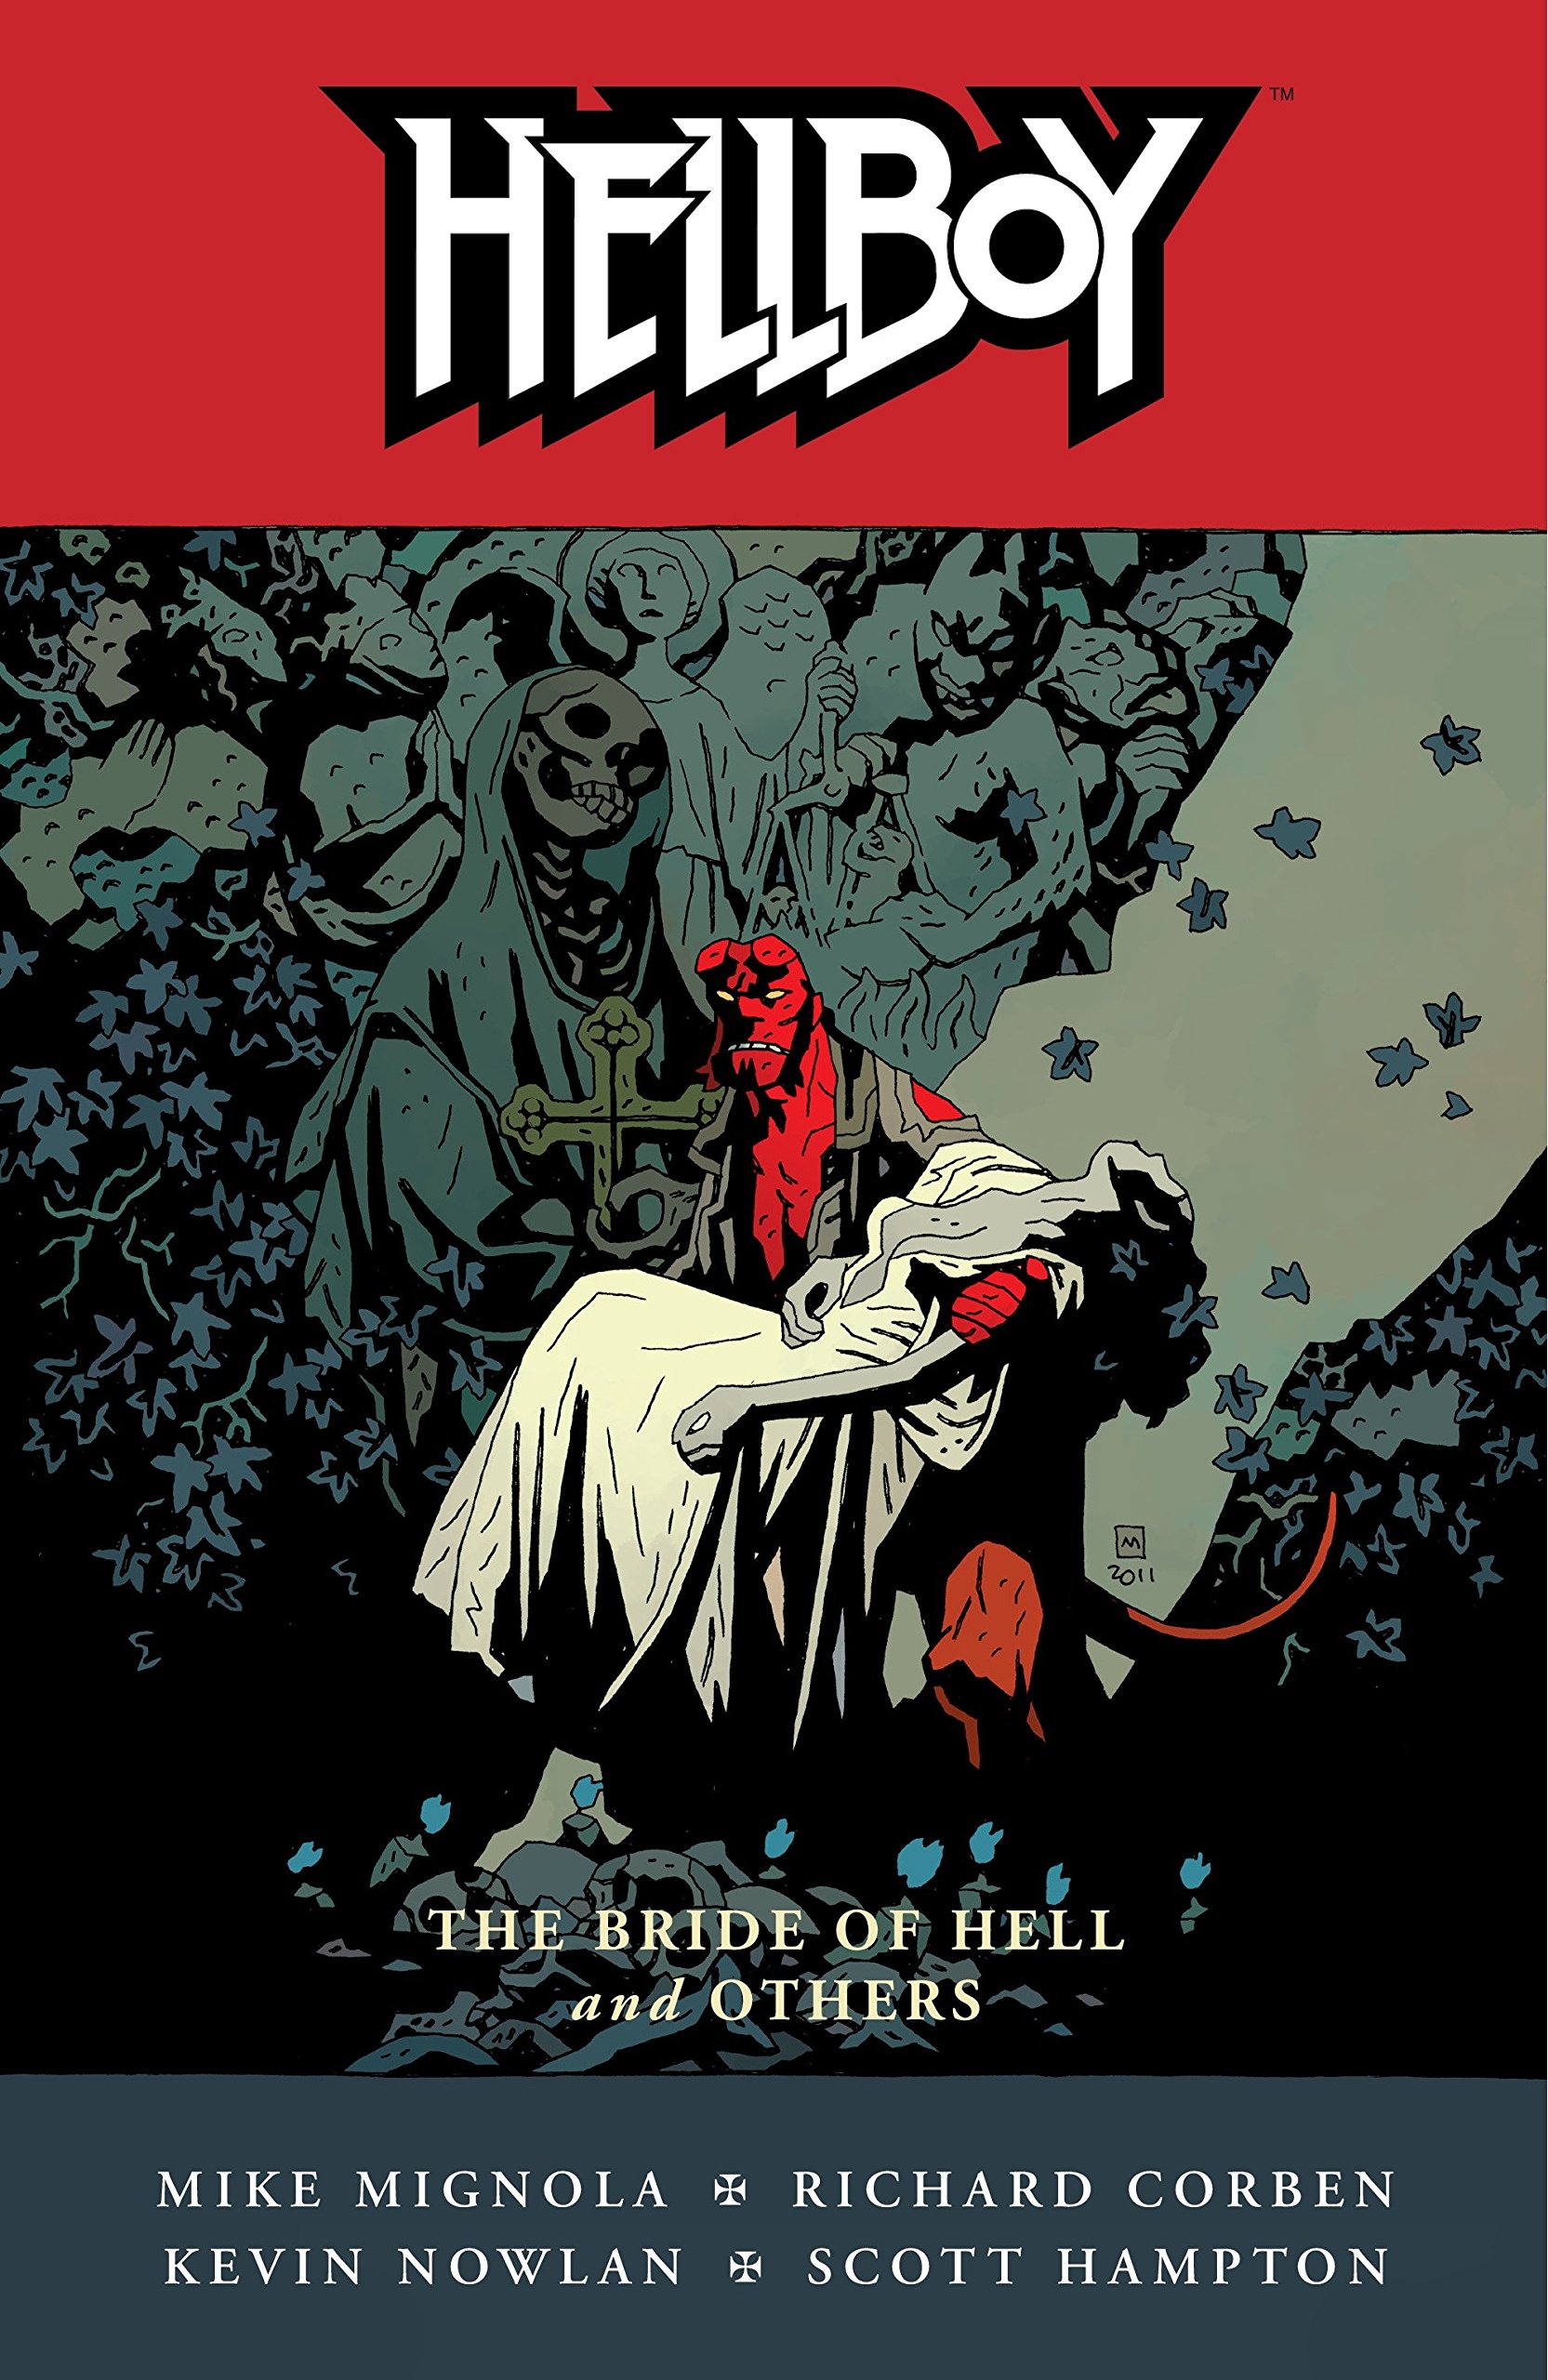 Hellboy vol 11: The Bride of Hell and Others story by Mike Mignola.